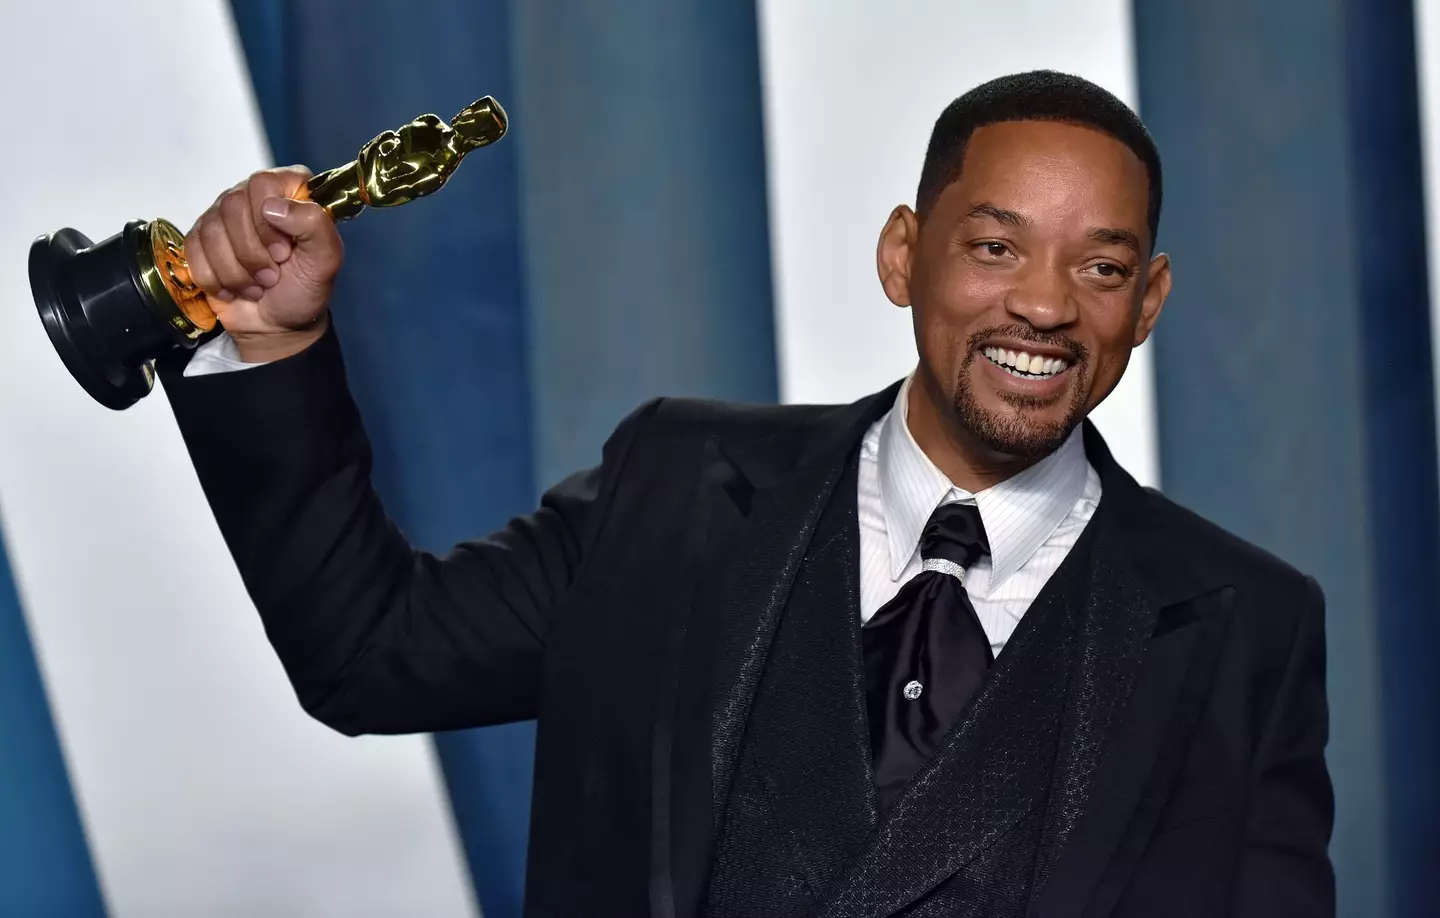 Will Smith and his Best Actor Award at the 94th Academy Awards.